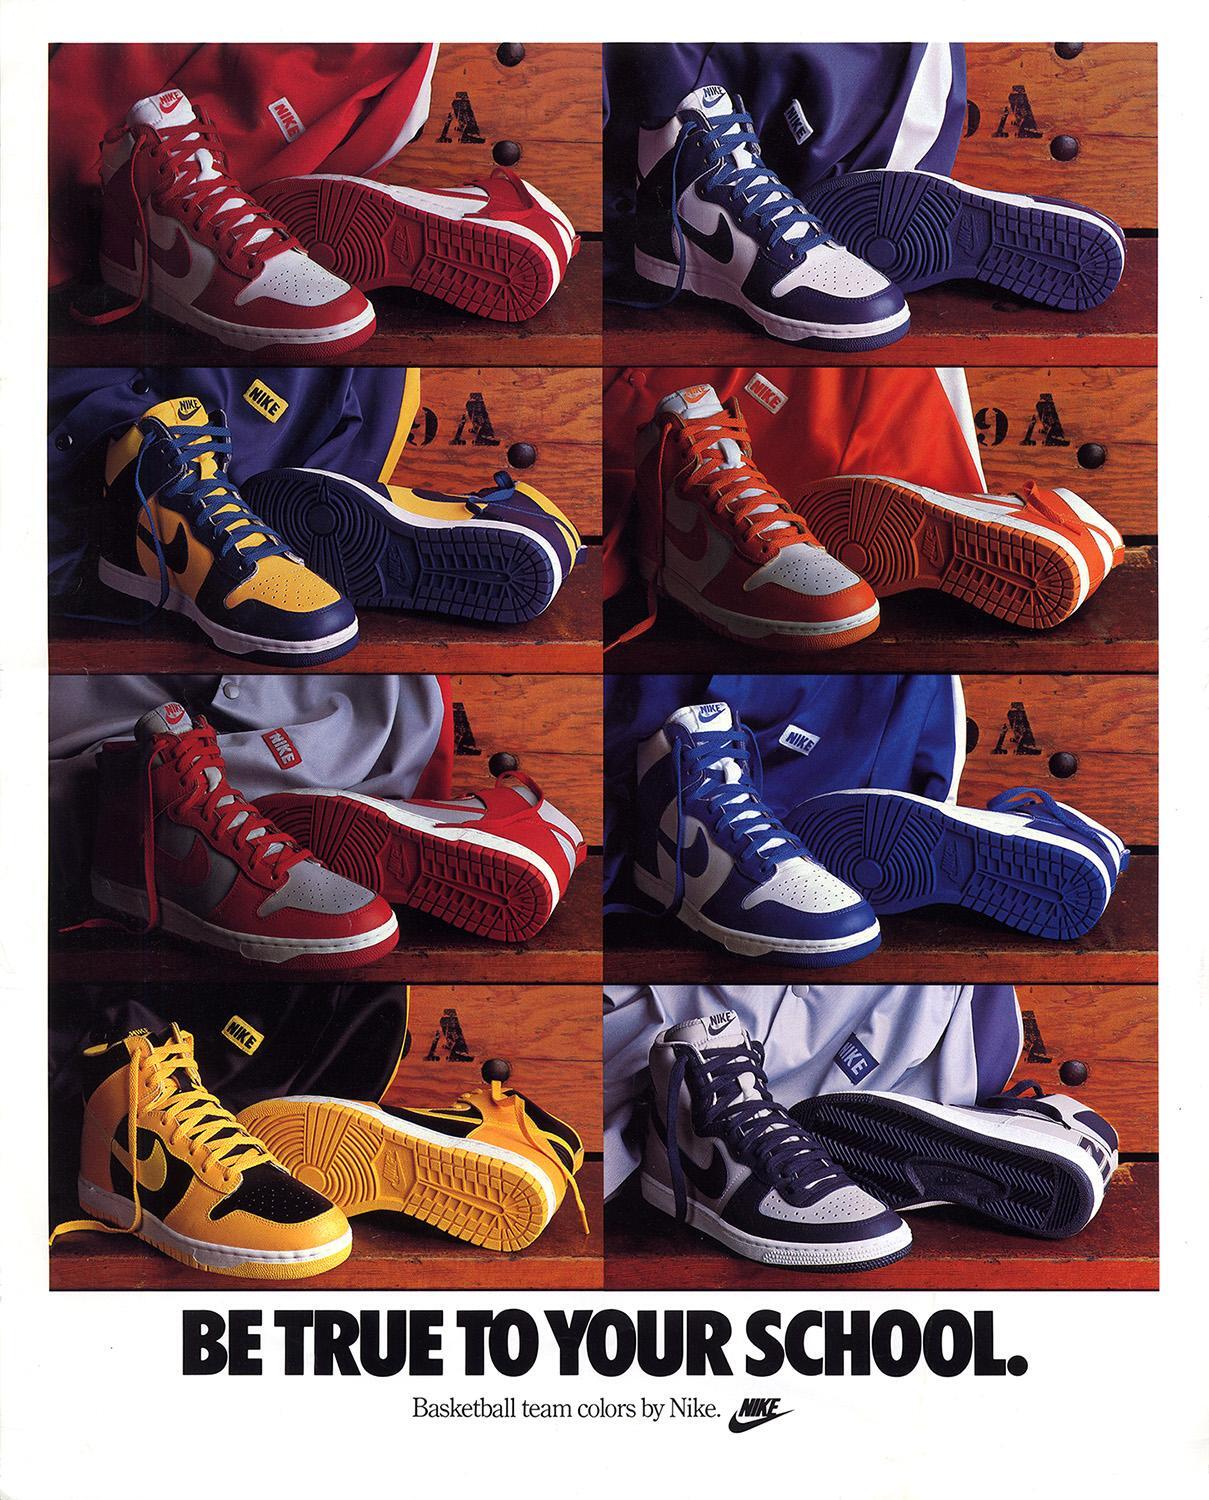 Nike Basketball Twitter: "How do you stay true to your school? Share your images with us on Instagram #NikeRoar. http://t.co/yIRKlUbDMQ" / Twitter